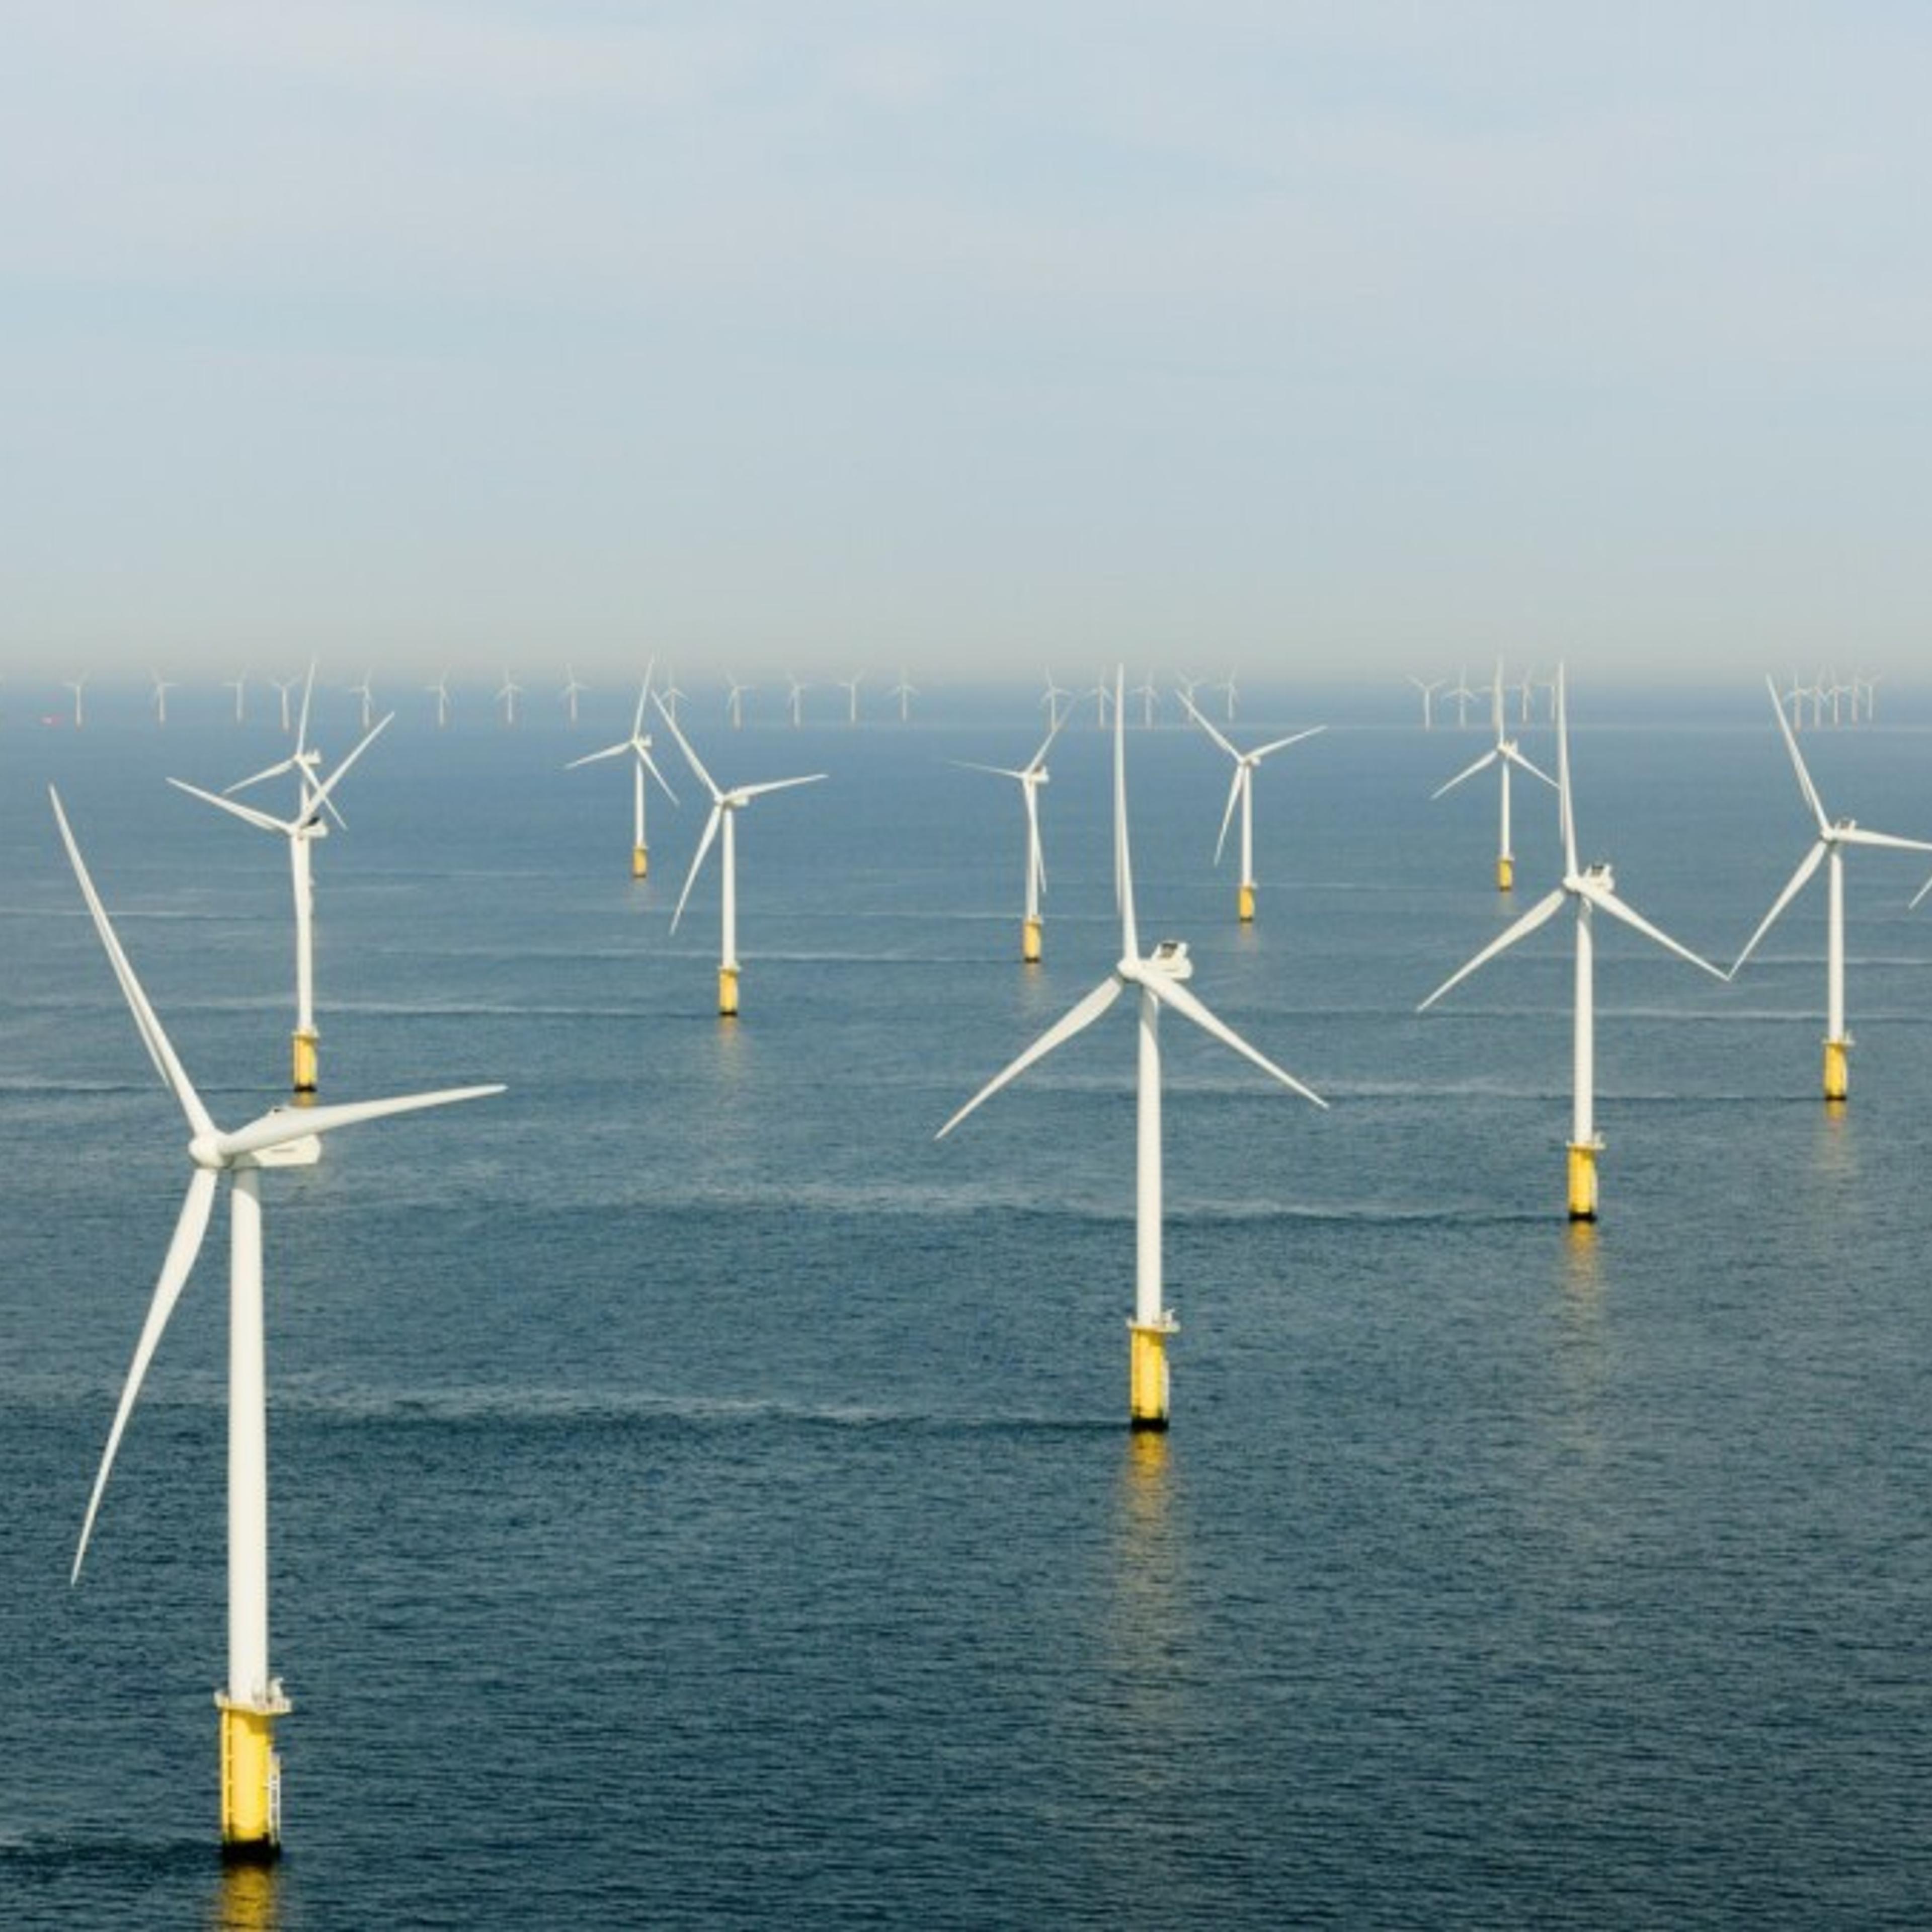 Offshore wind turbines in a row in the sea